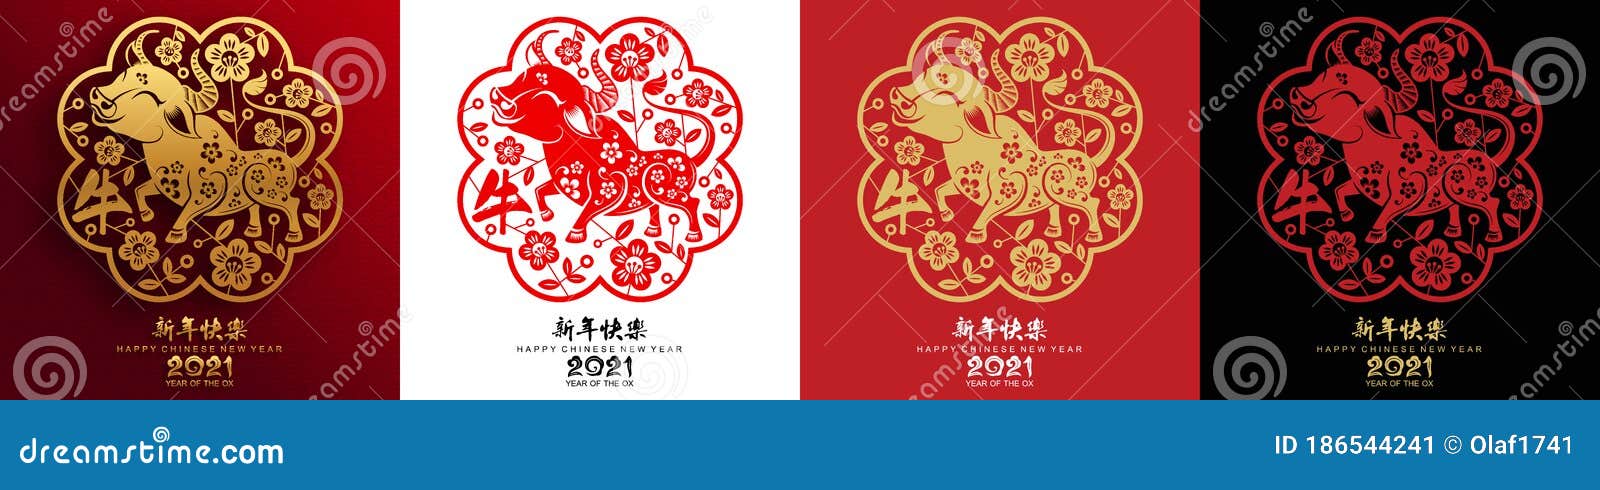 Happy Chinese New Year 2021 Stock Vector - Illustration of beijing